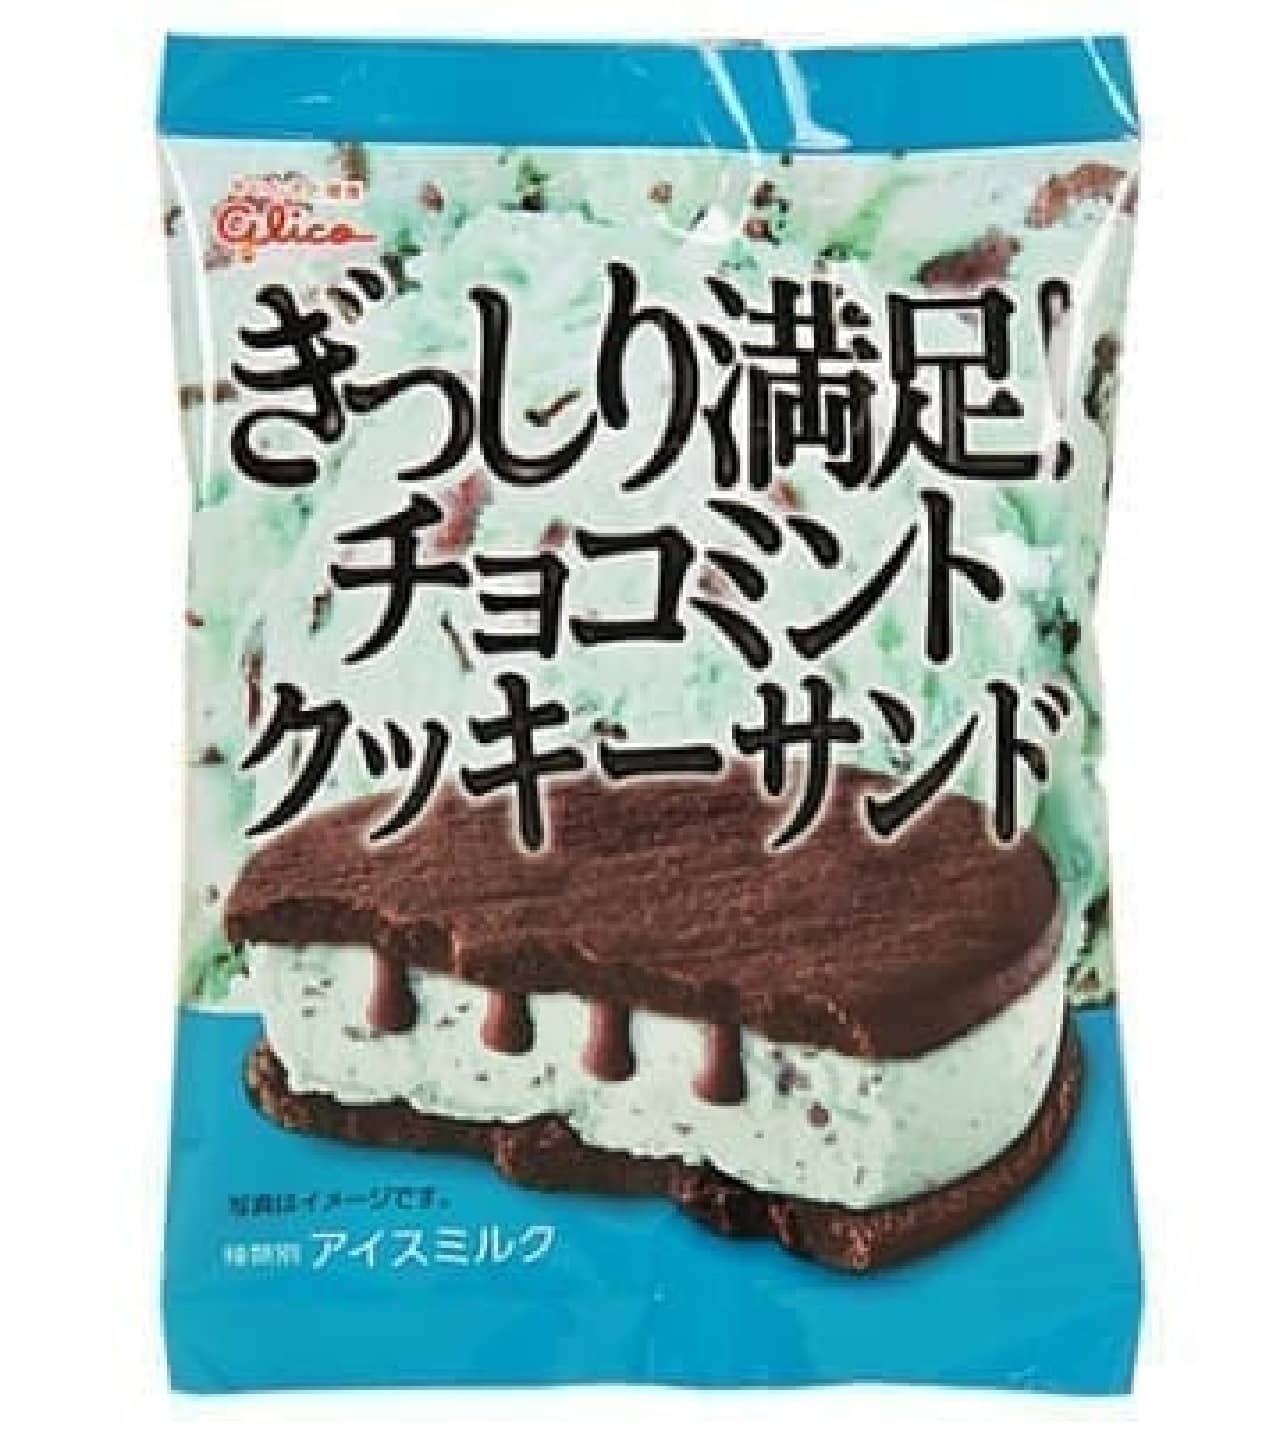 FamilyMart "Glico Fully Satisfied! Chocolate Mint Cookie Sandwich"